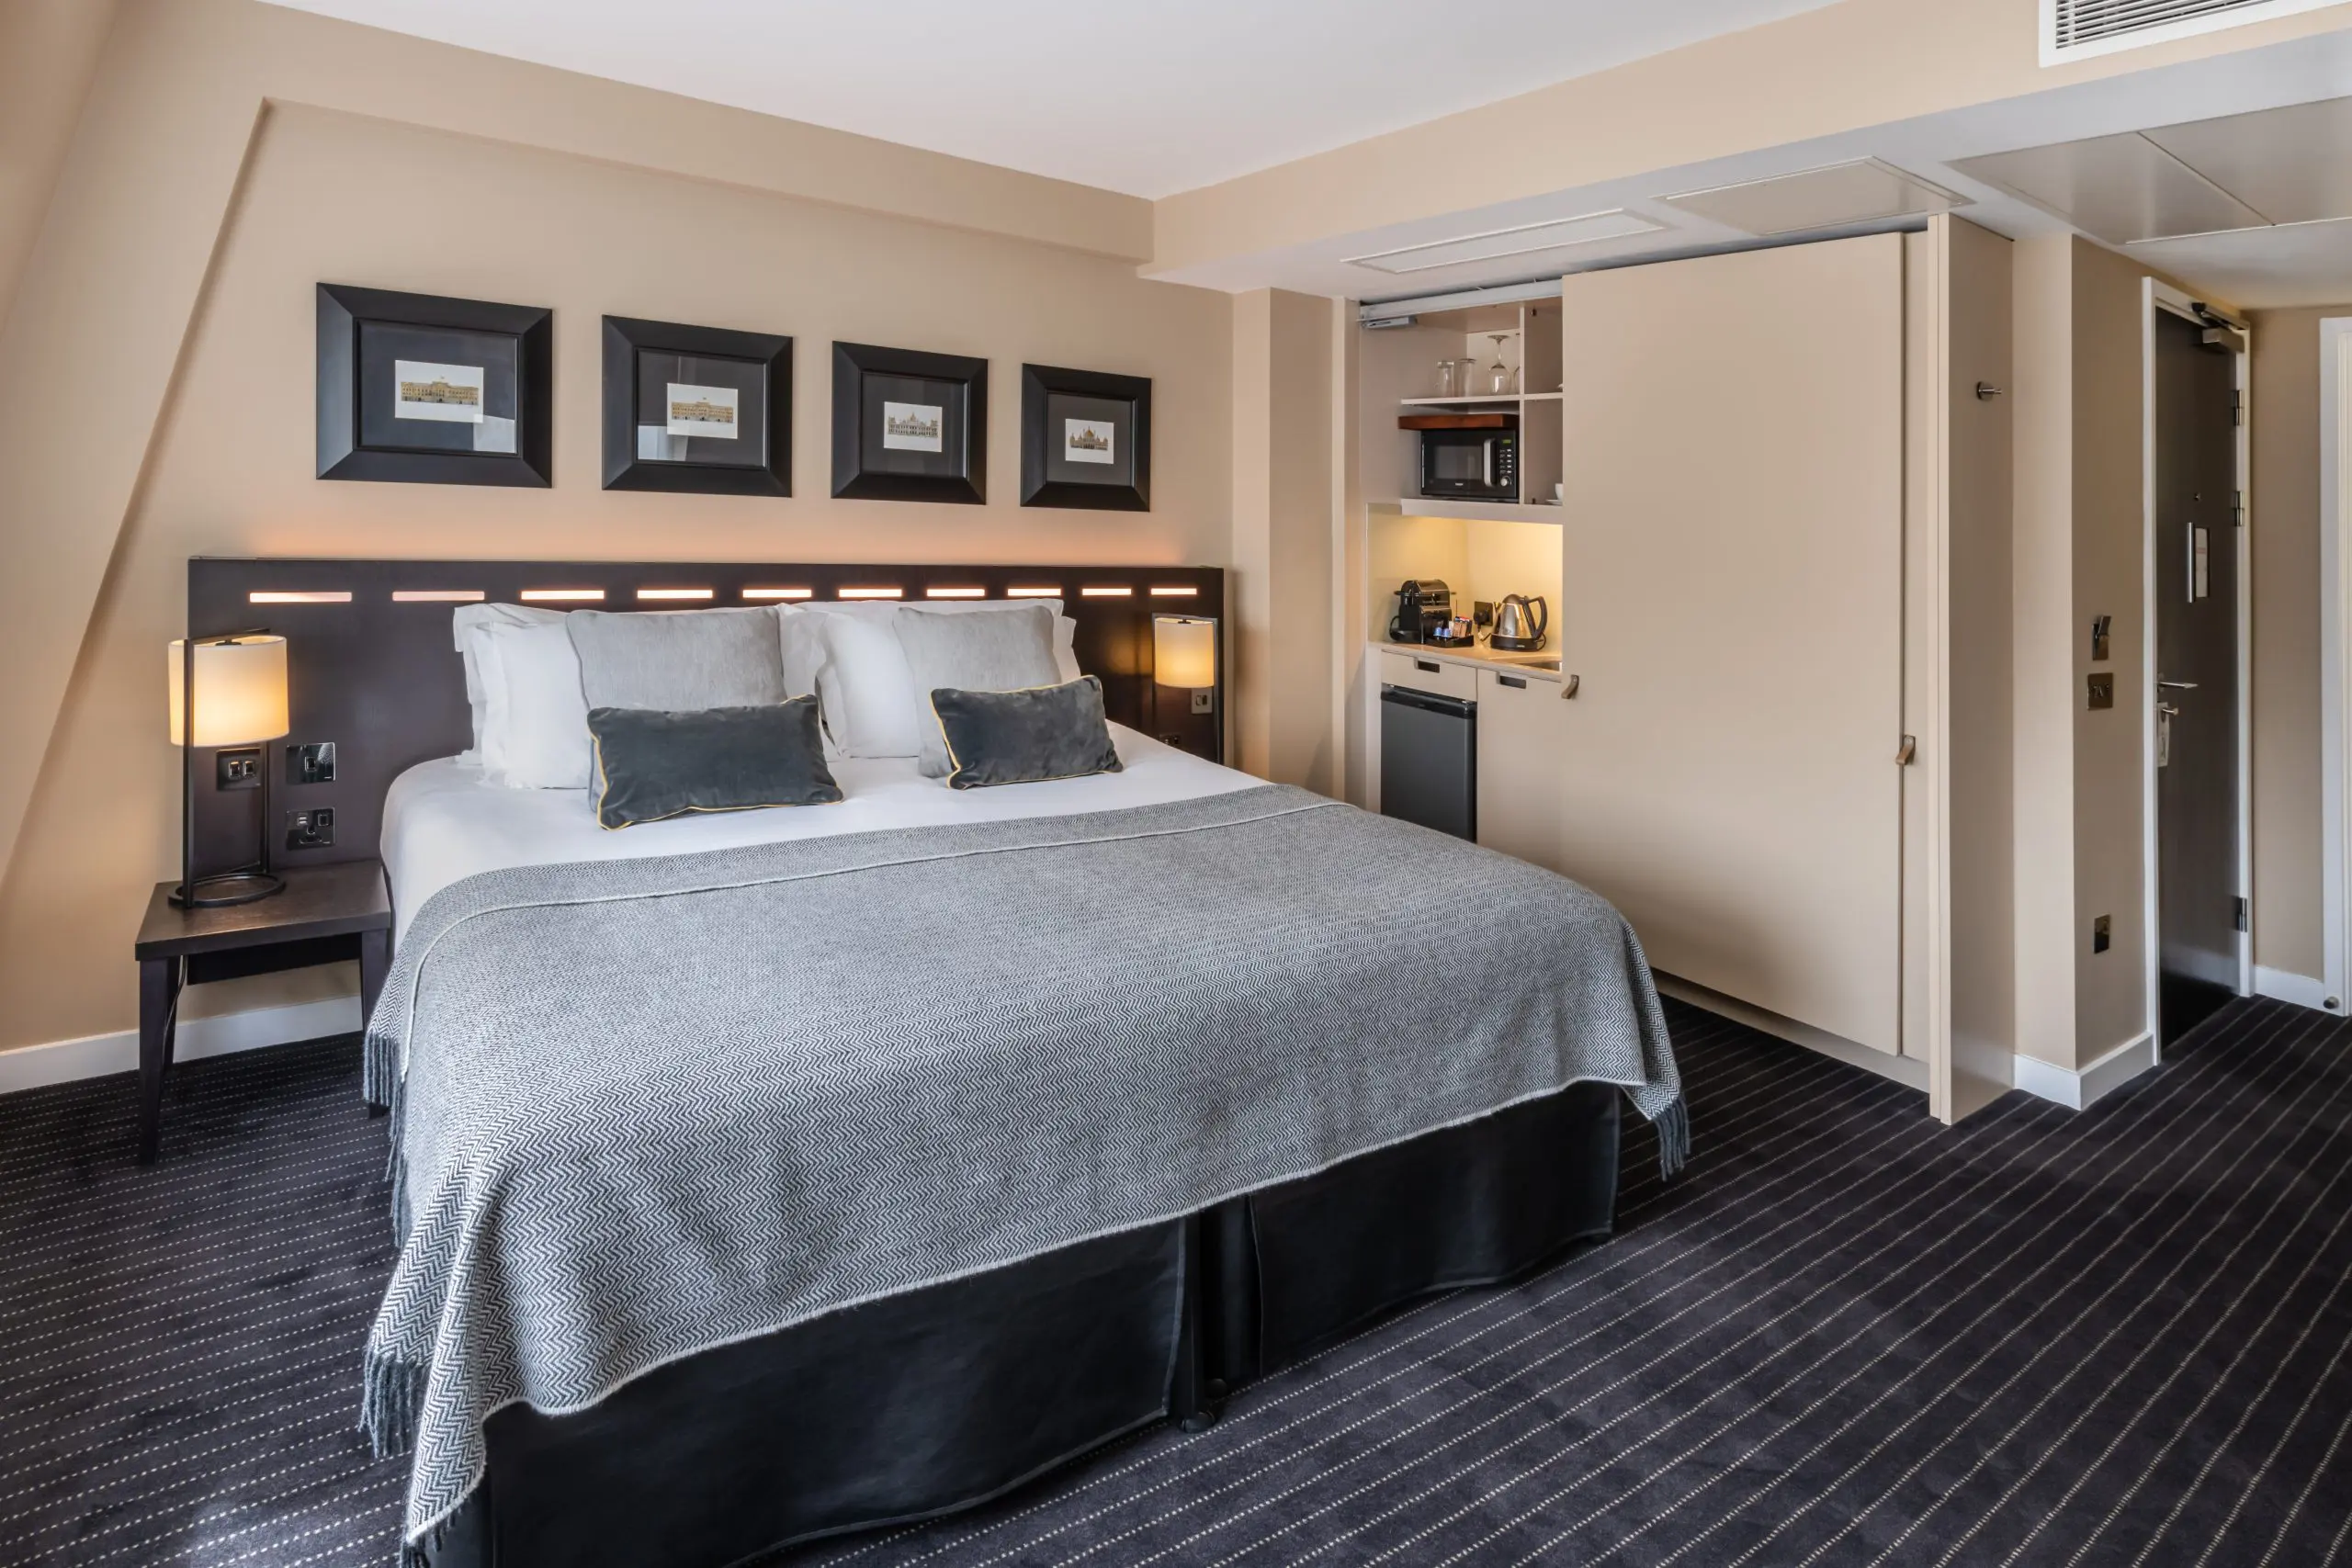 A large suite with a double bed, bedside table and integrated kitchen area.